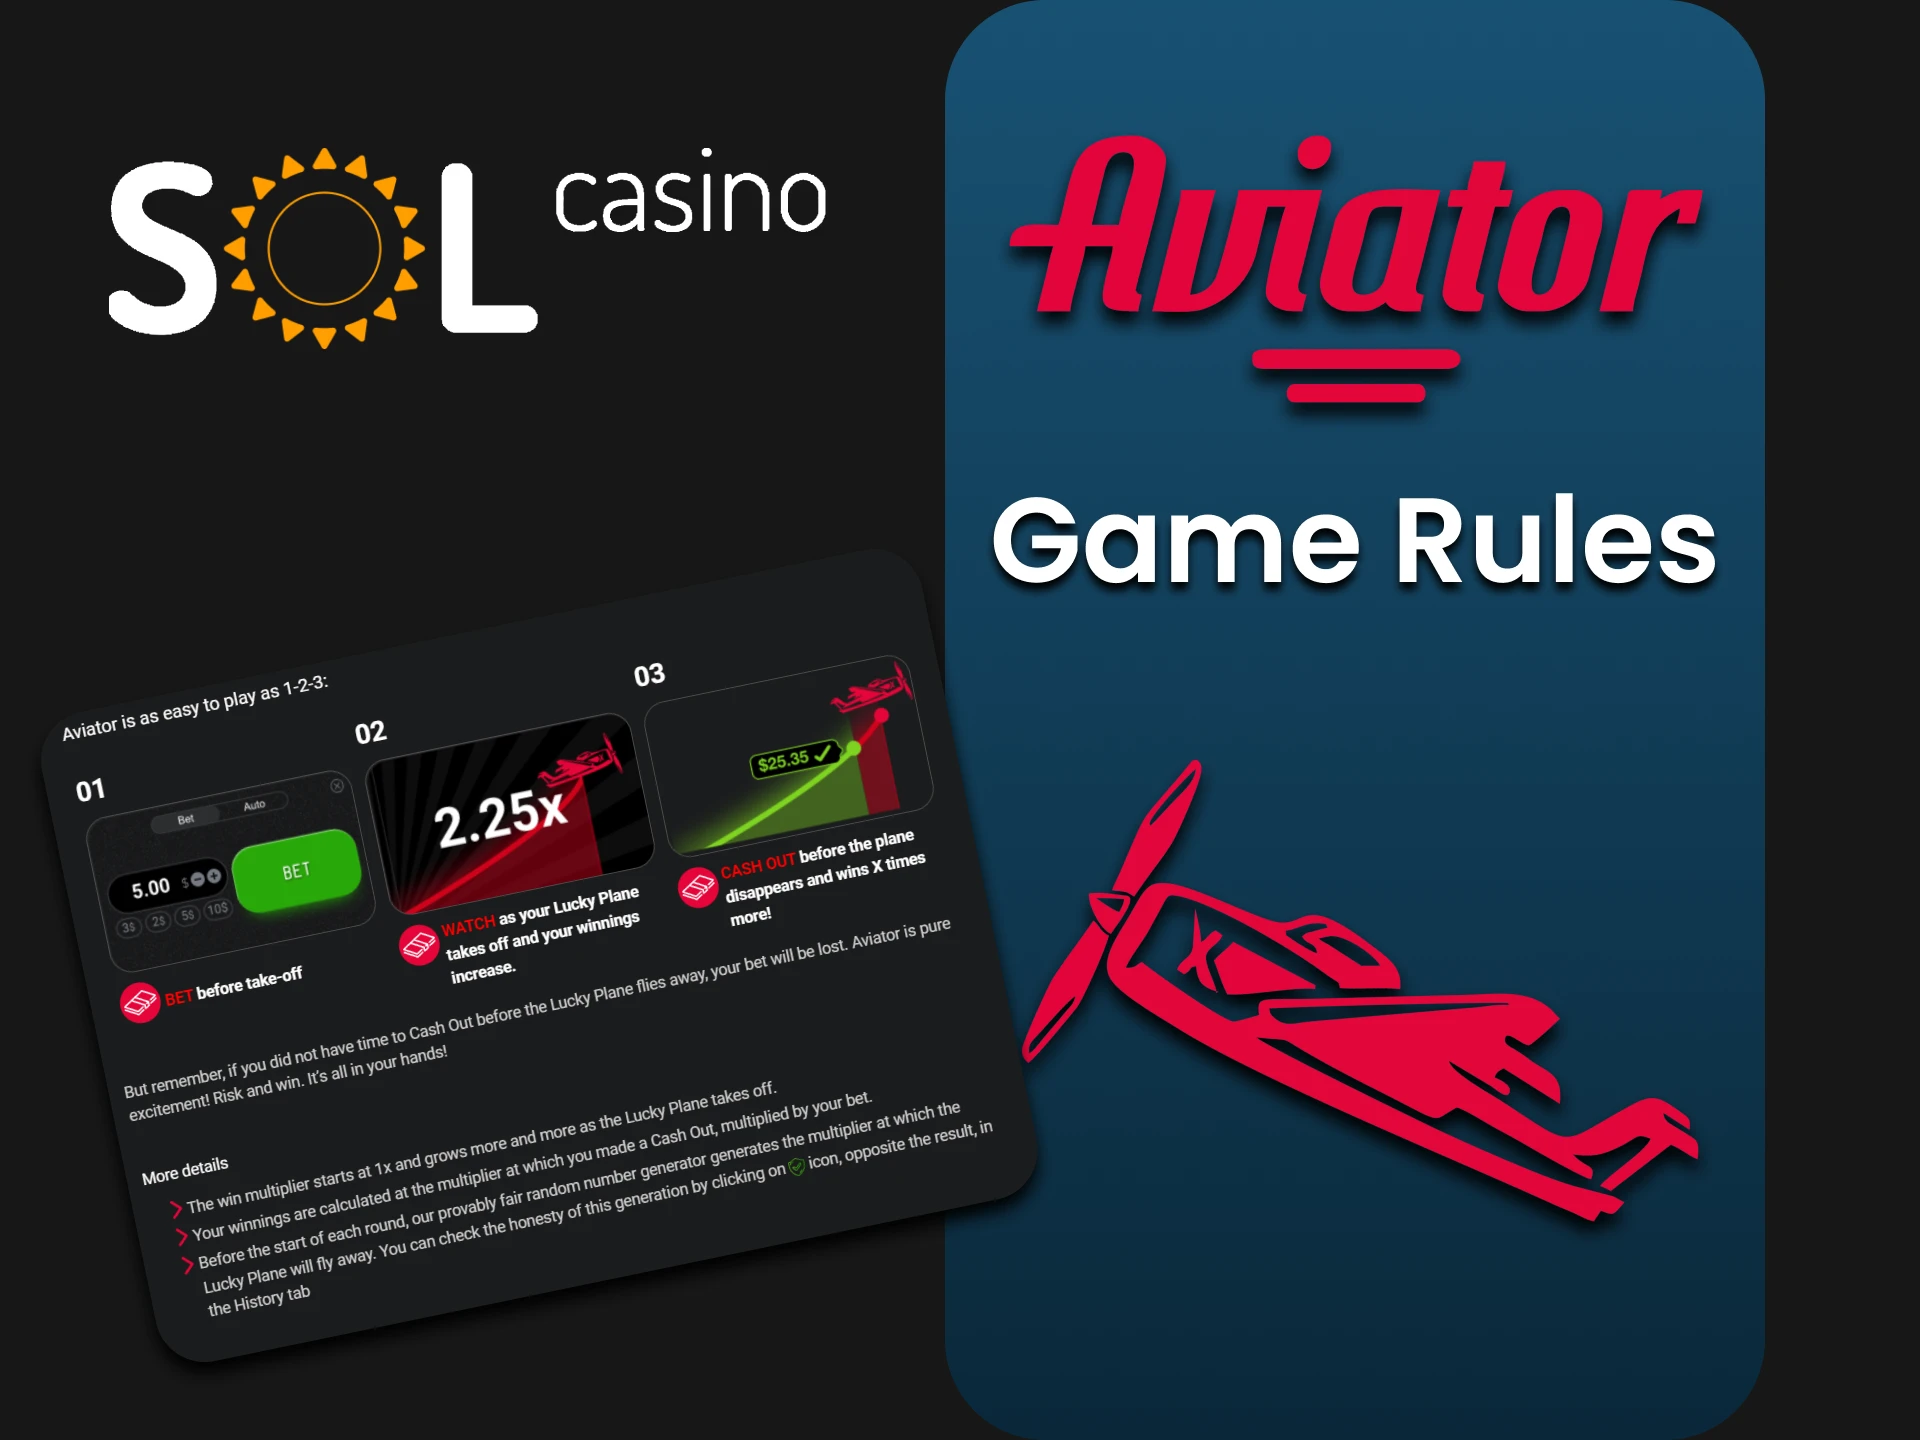 Carefully study the rules of the Aviator game at Sol Casino.